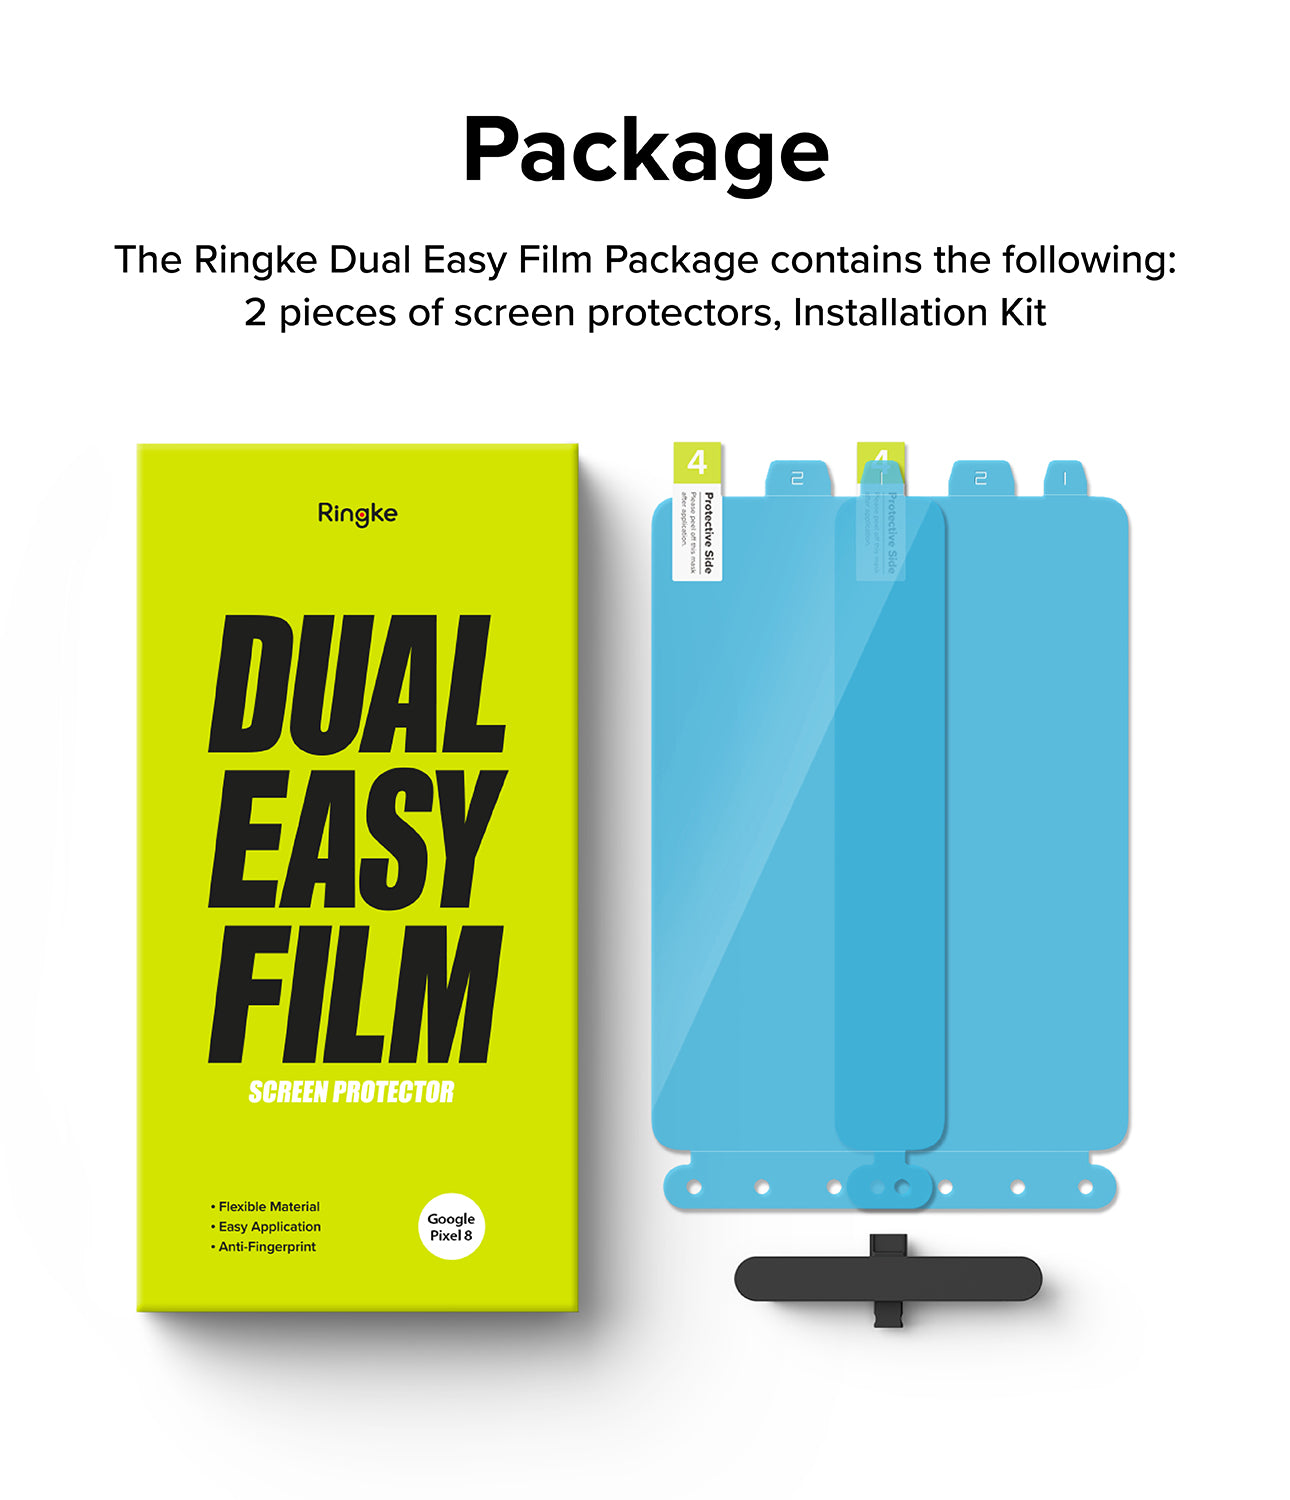 Google Pixel 8 Screen Protector | Dual Easy Film-2 Pieces Of Screen Protectors and an Installation Kit Package